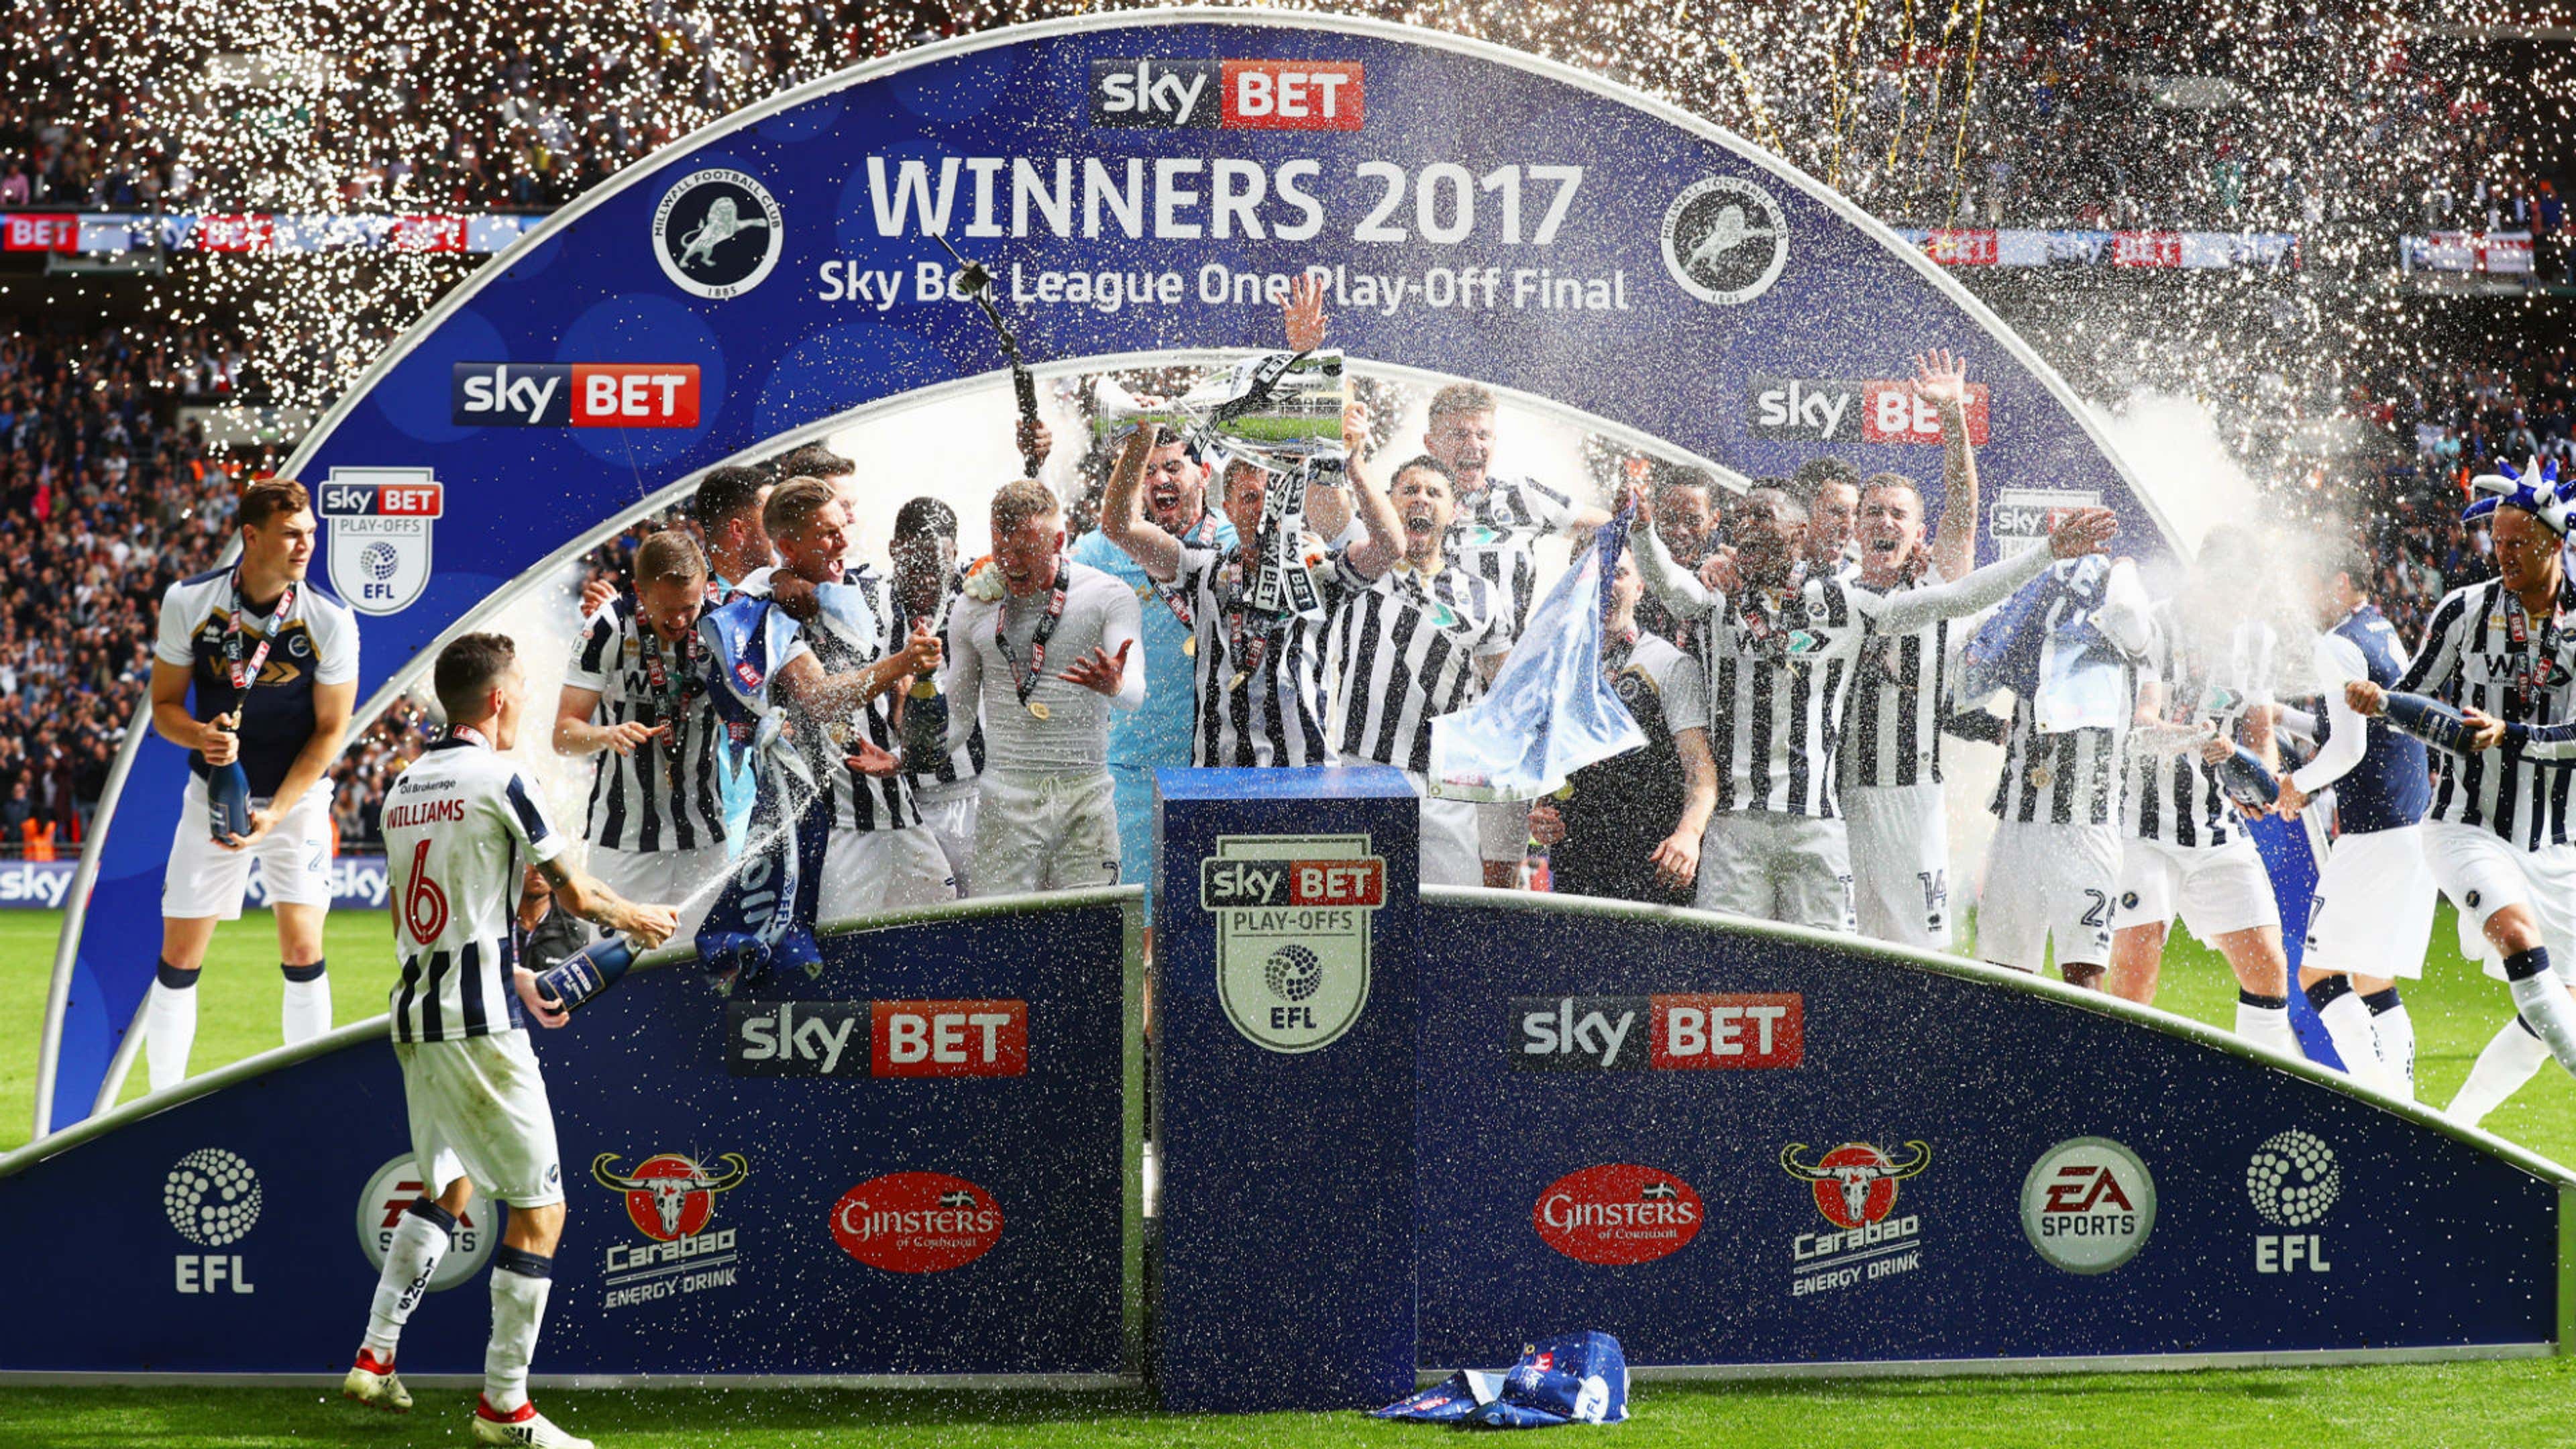 League One play-off final 2007